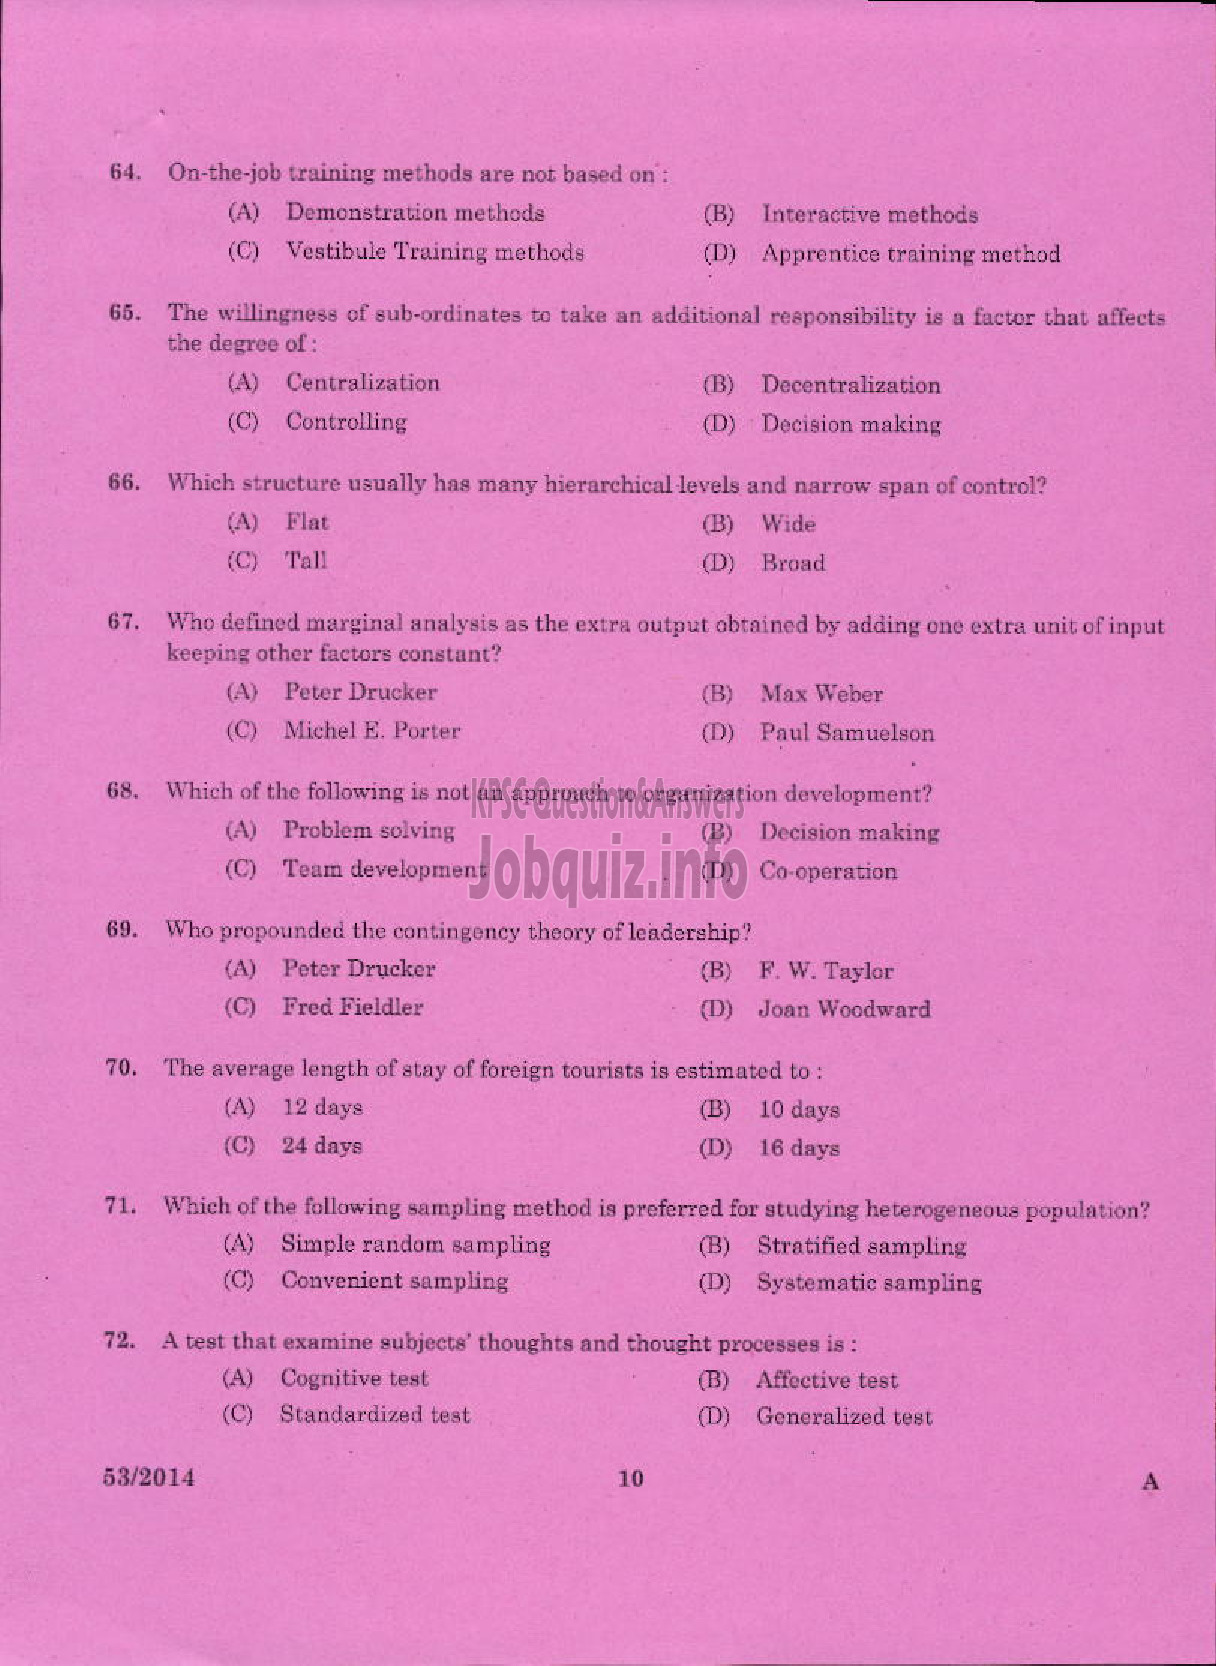 Kerala PSC Question Paper - LECTURER IN TRAVEL AND TOURISM KERALA COLLEGIATE EDUCATION-8